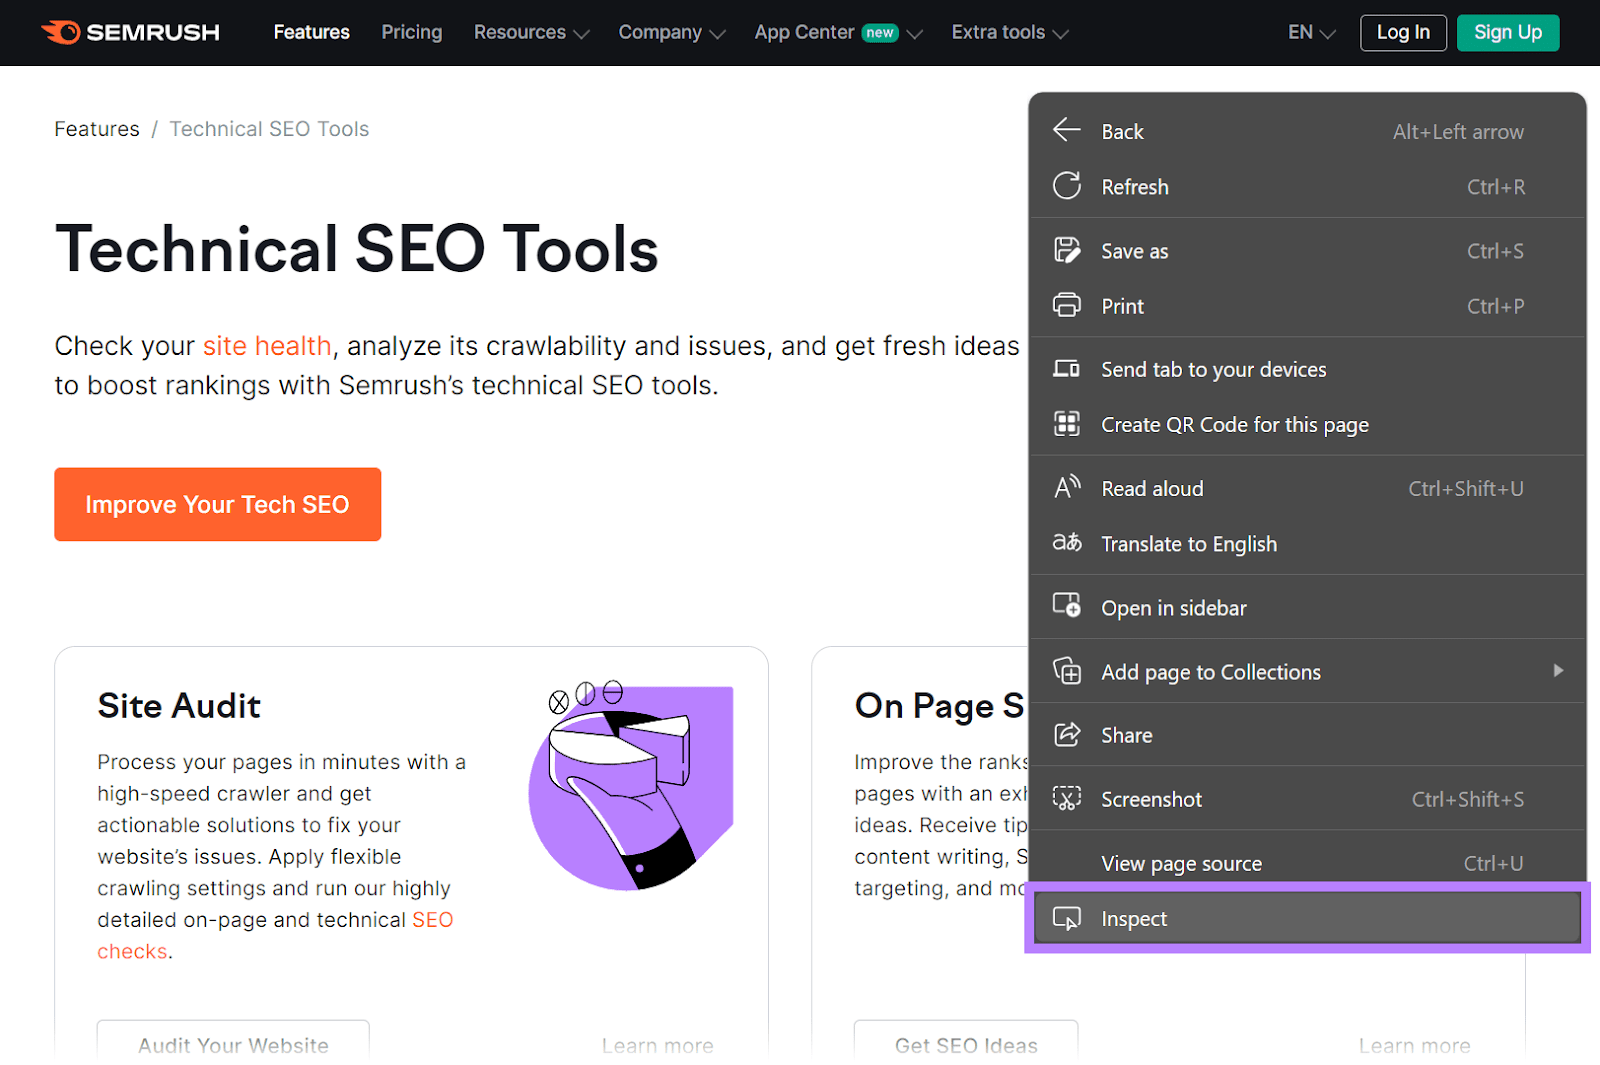 Semrush Technical SEO Tools page with right click menu shown and the inspect option highlighted.